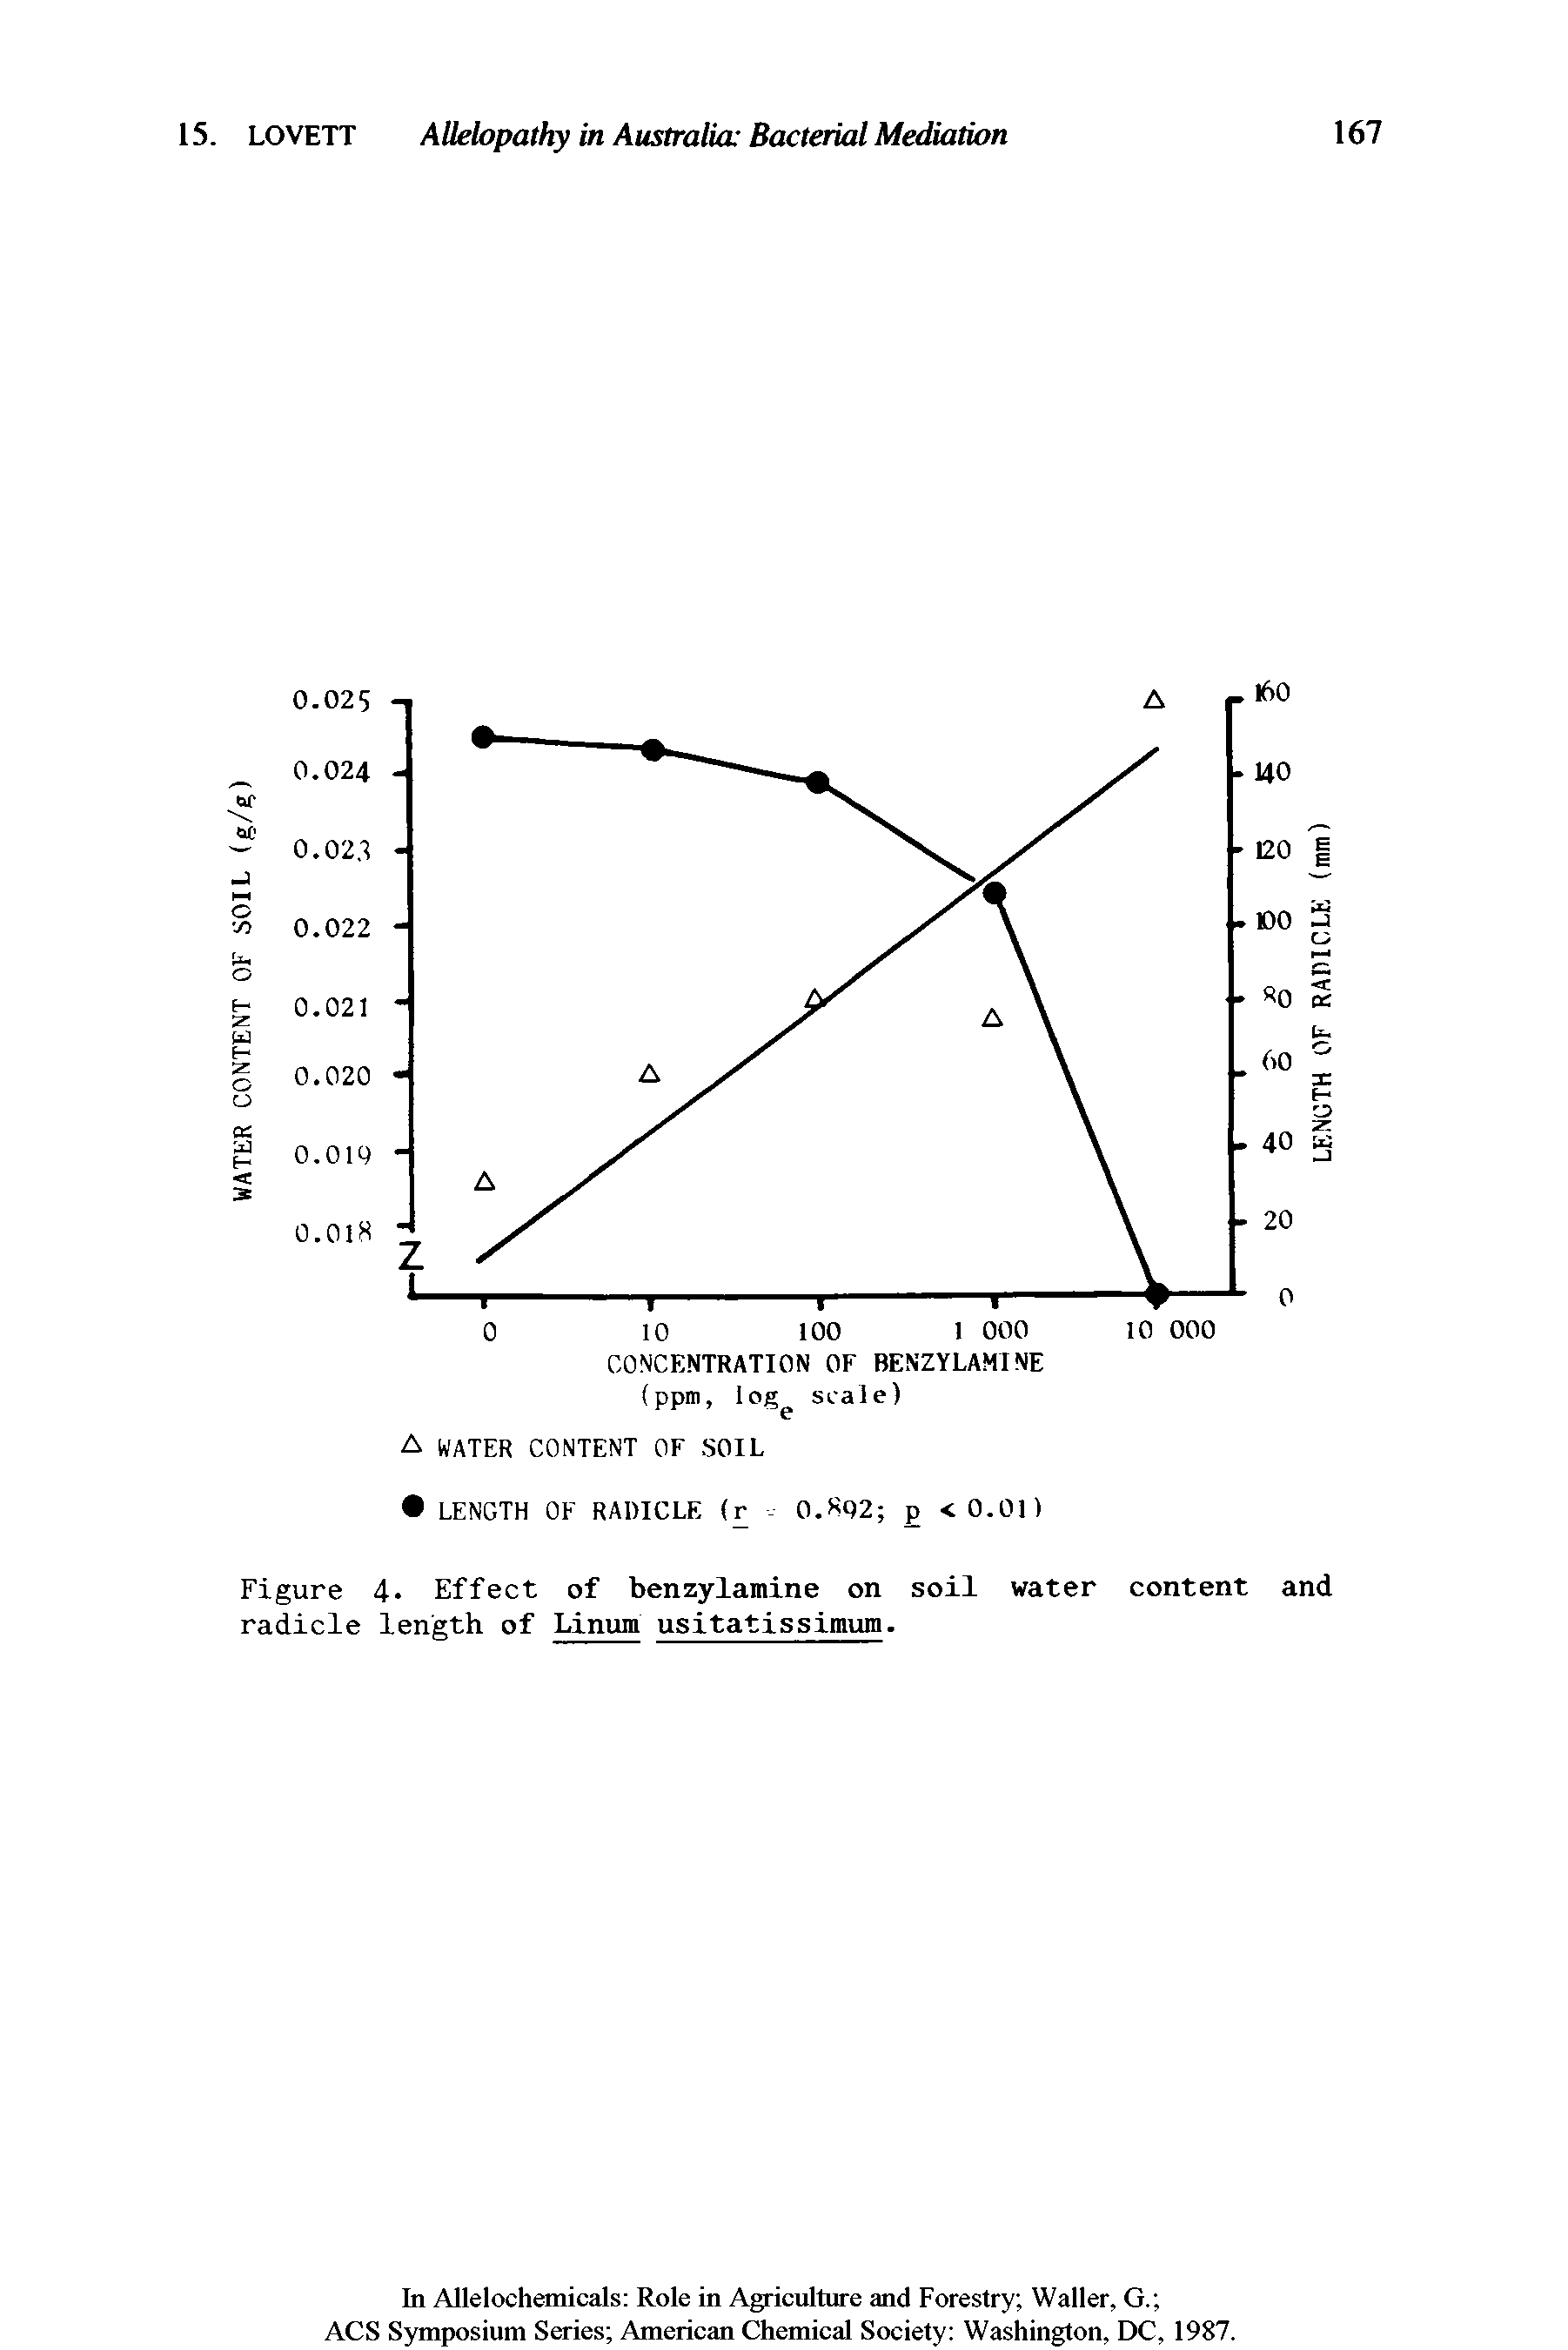 Figure 4 Effect of benzylamine on soil water content and radicle length of Linum usitatissimum.